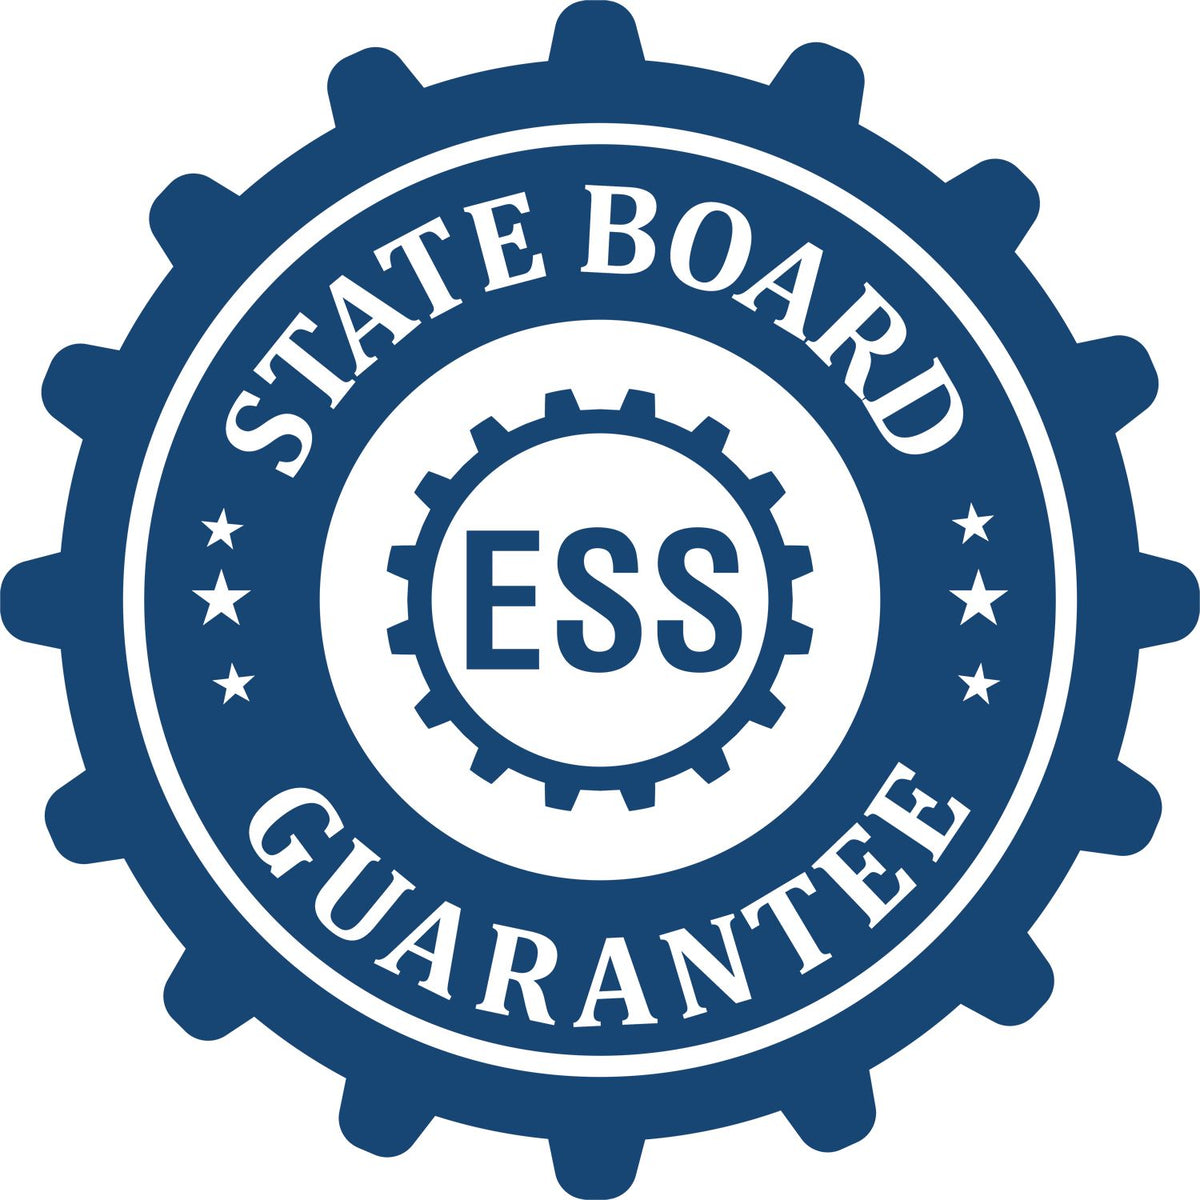 An emblem in a gear shape illustrating a state board guarantee for the State of Georgia Long Reach Architectural Embossing Seal product.